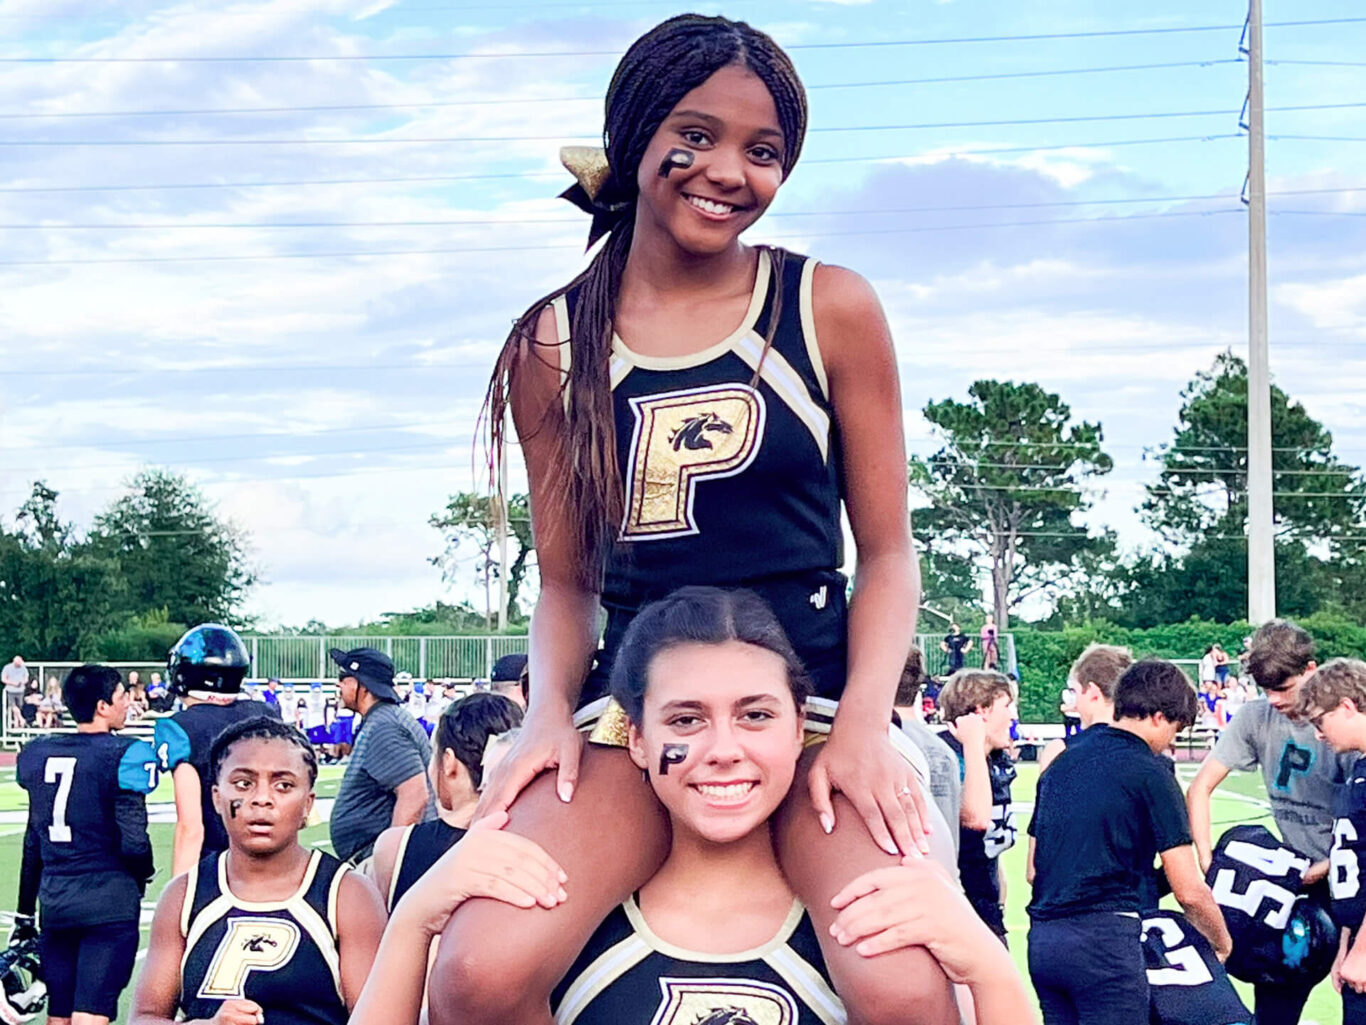 Two competitive cheerleaders sitting on top of each other at a football game.